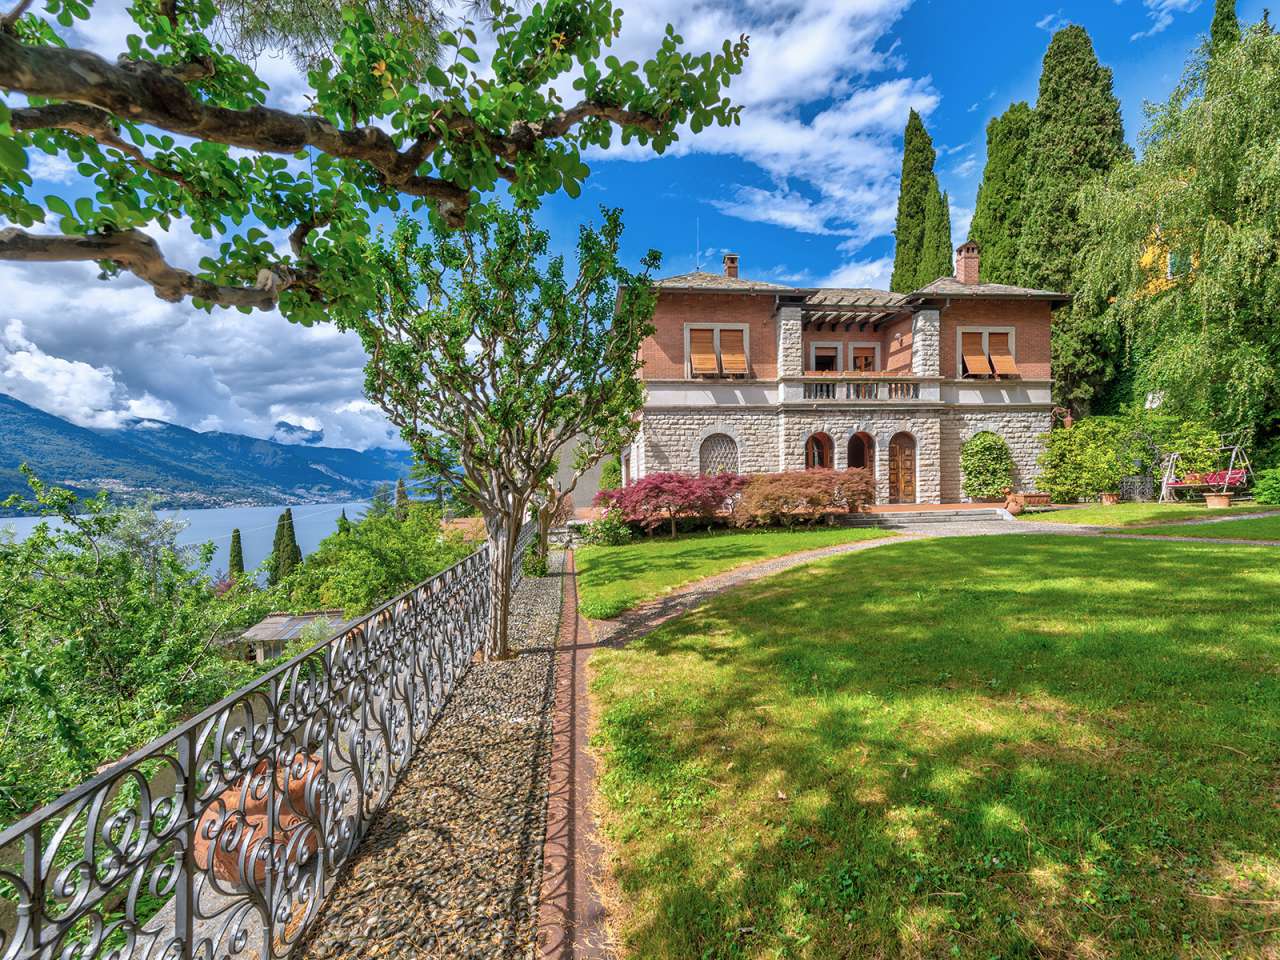 Waterfront villa with pool for sale on Lake Como, and boathouse, nestling in beautiful landscaped gardens.